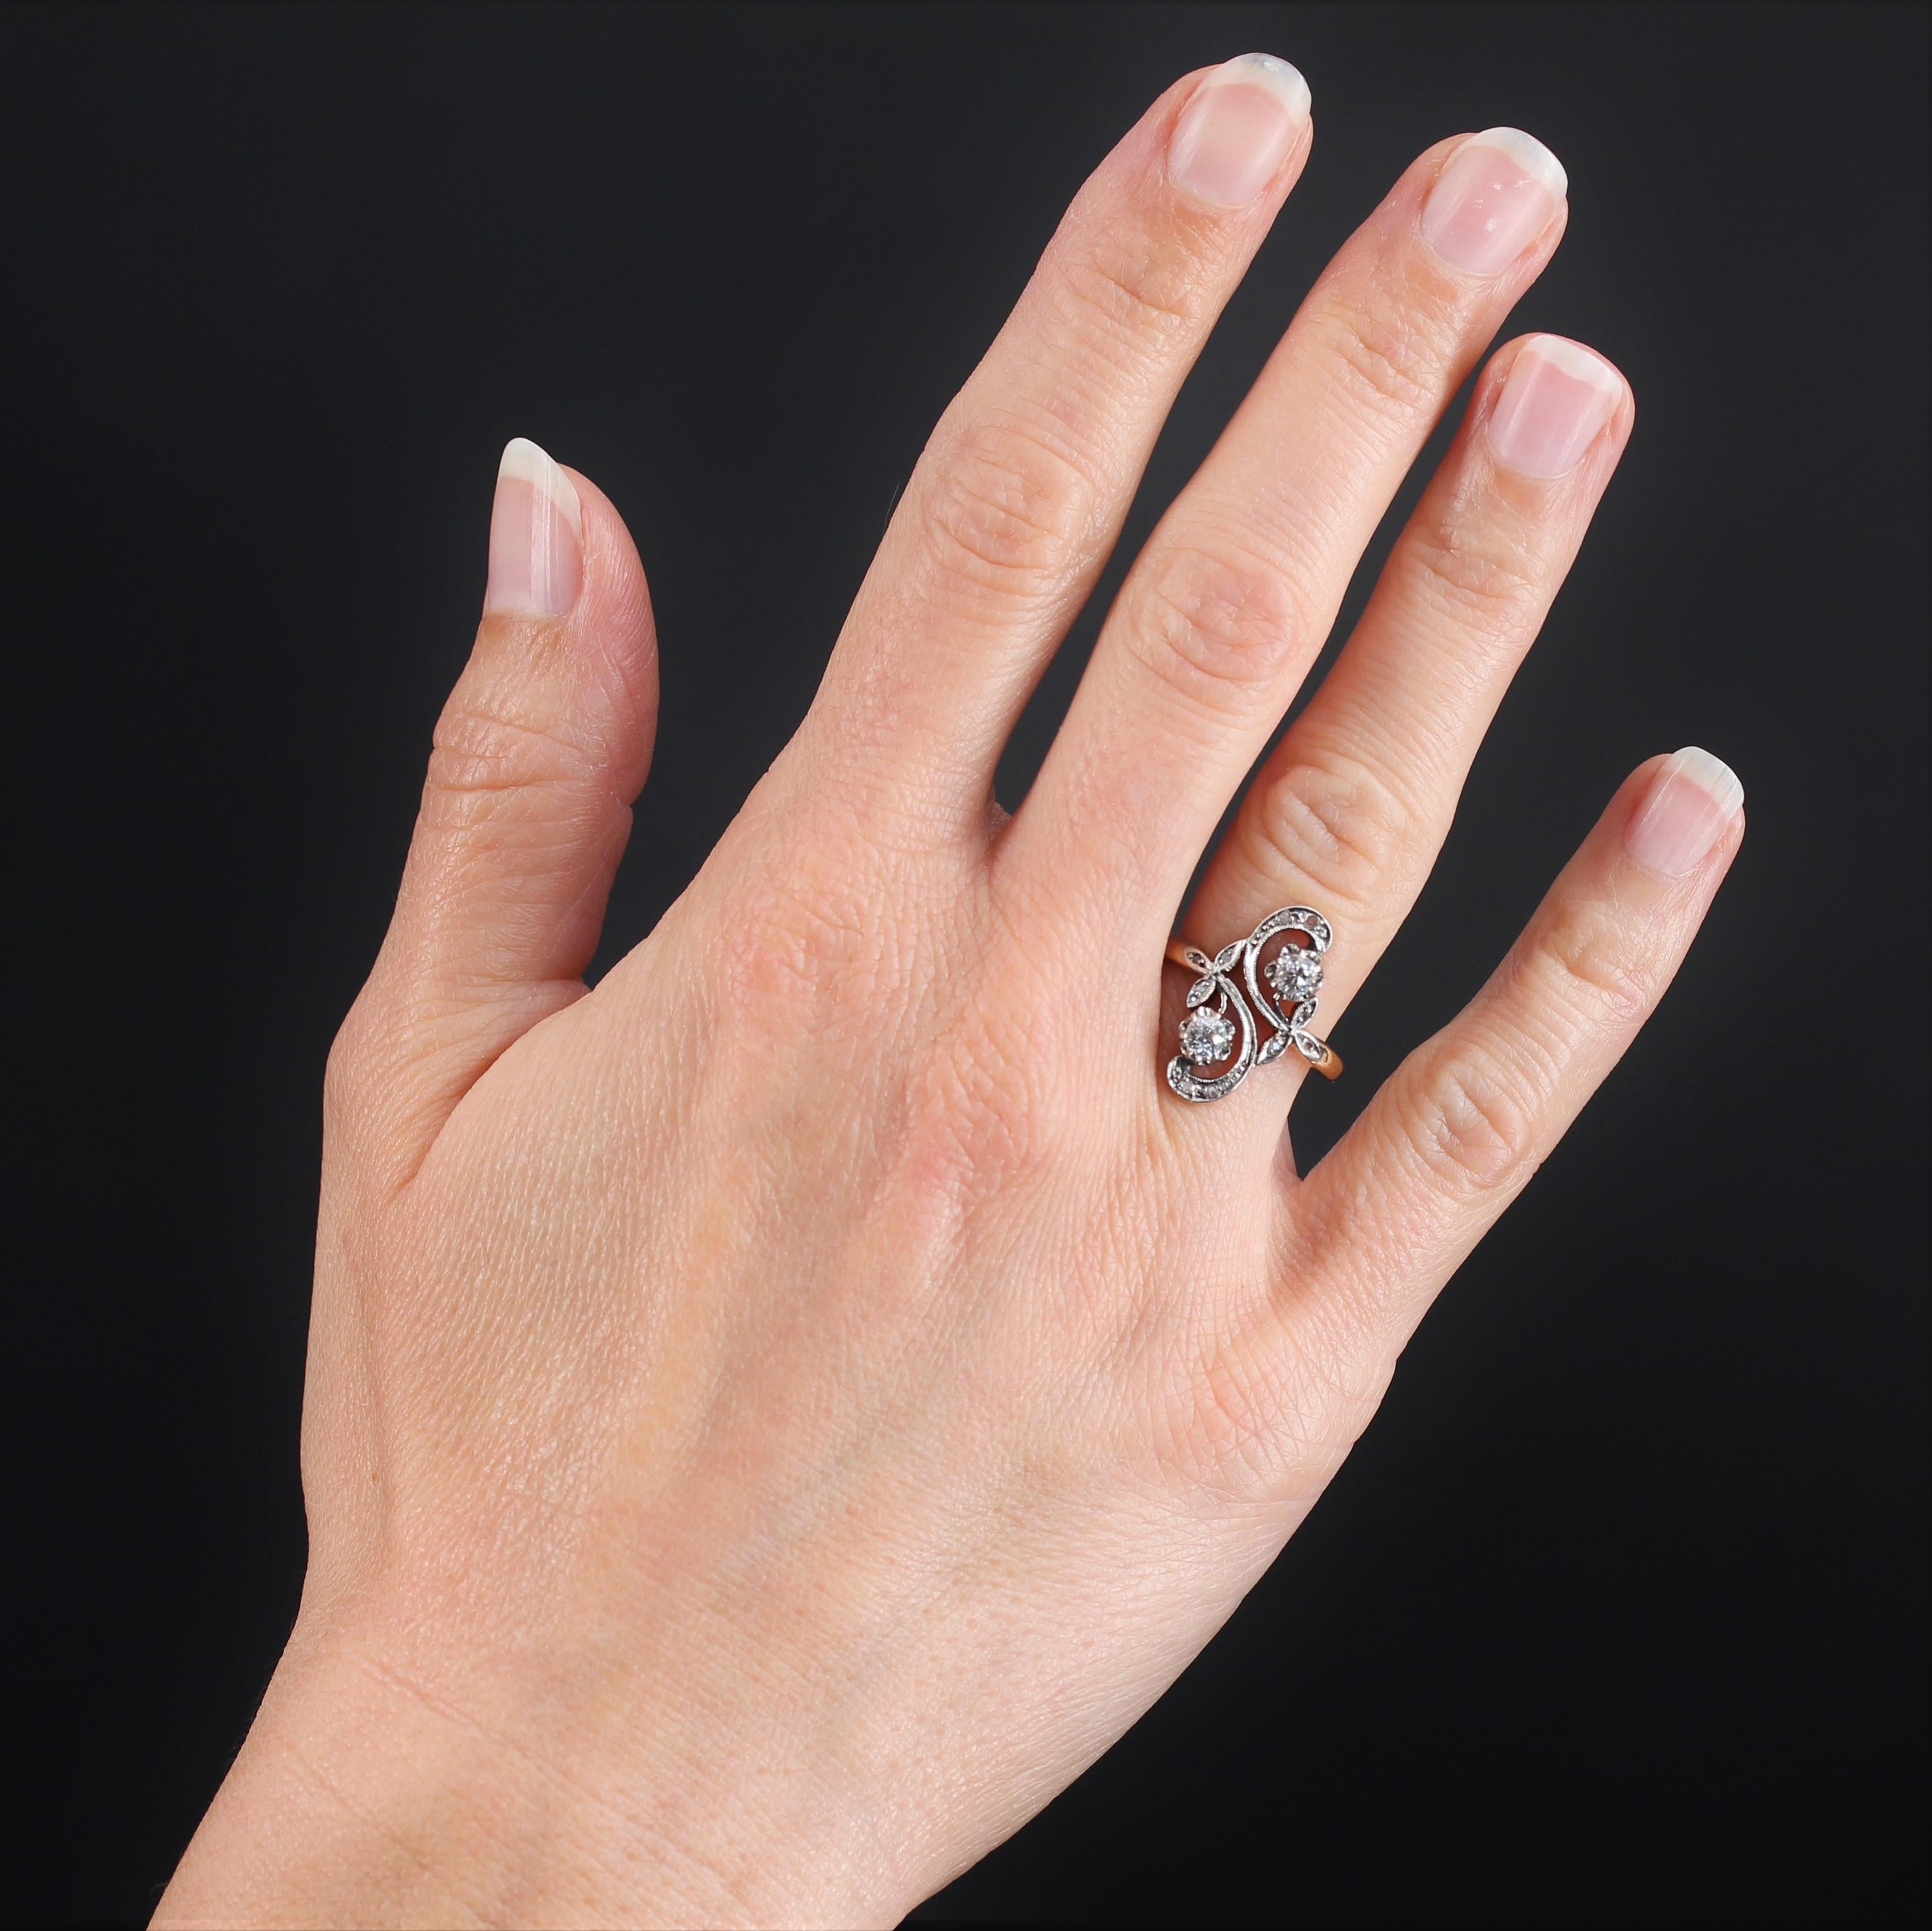 Ring in 18 karat yellow gold, owl hallmark and platinum, mascaron hallmark.
Feminine and authentic ring from the Belle Epoque, its setting is formed on the top of 2 floral pattern adorned with rose-cut diamonds and forming an 